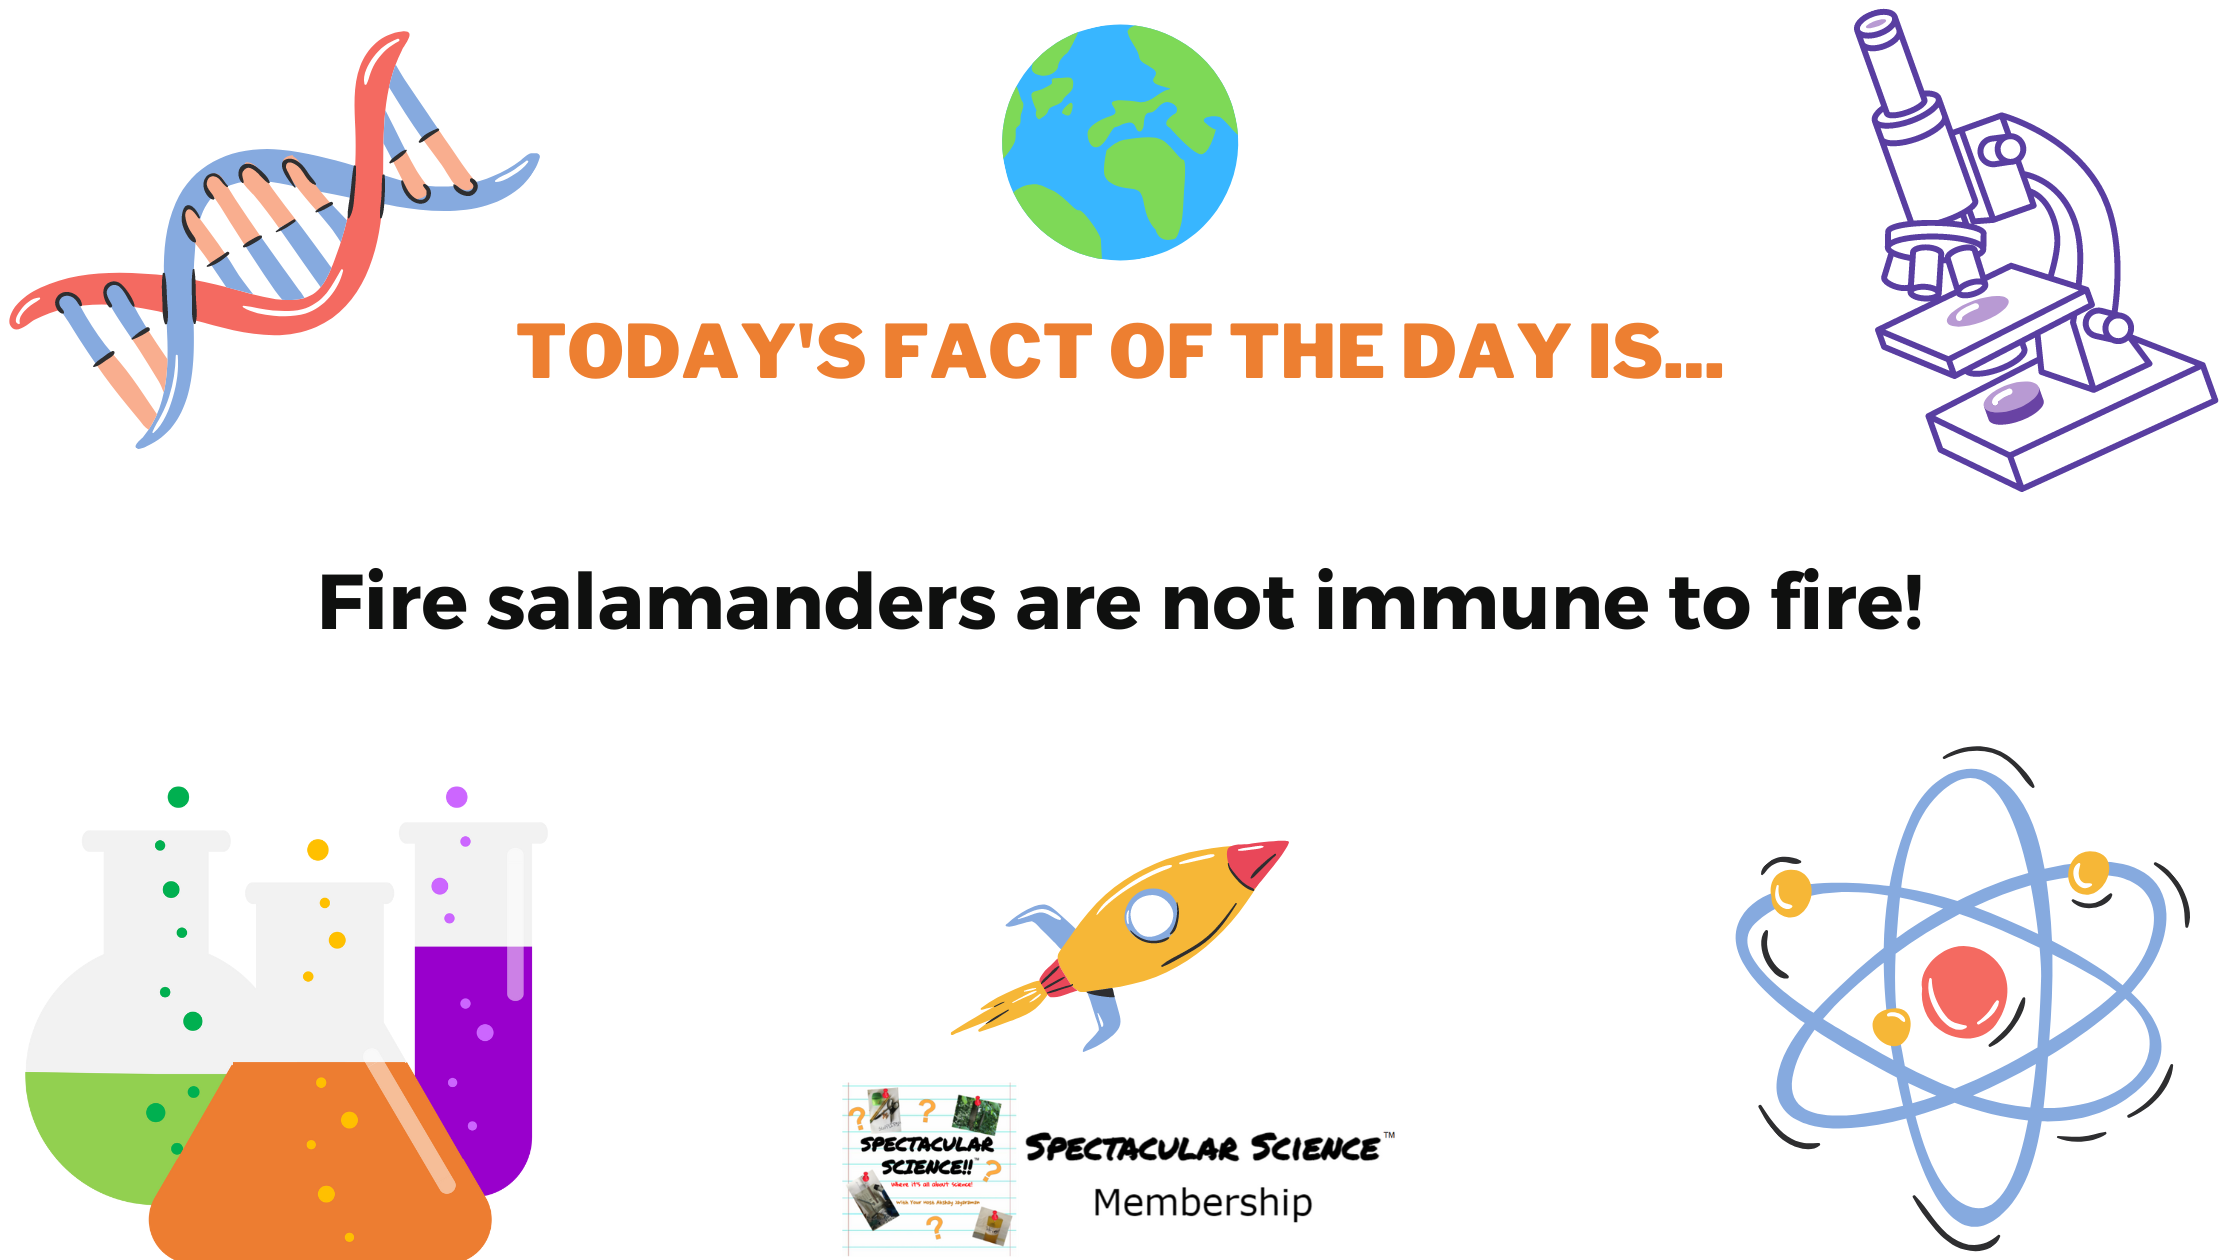 Fact of the Day Image September 25th